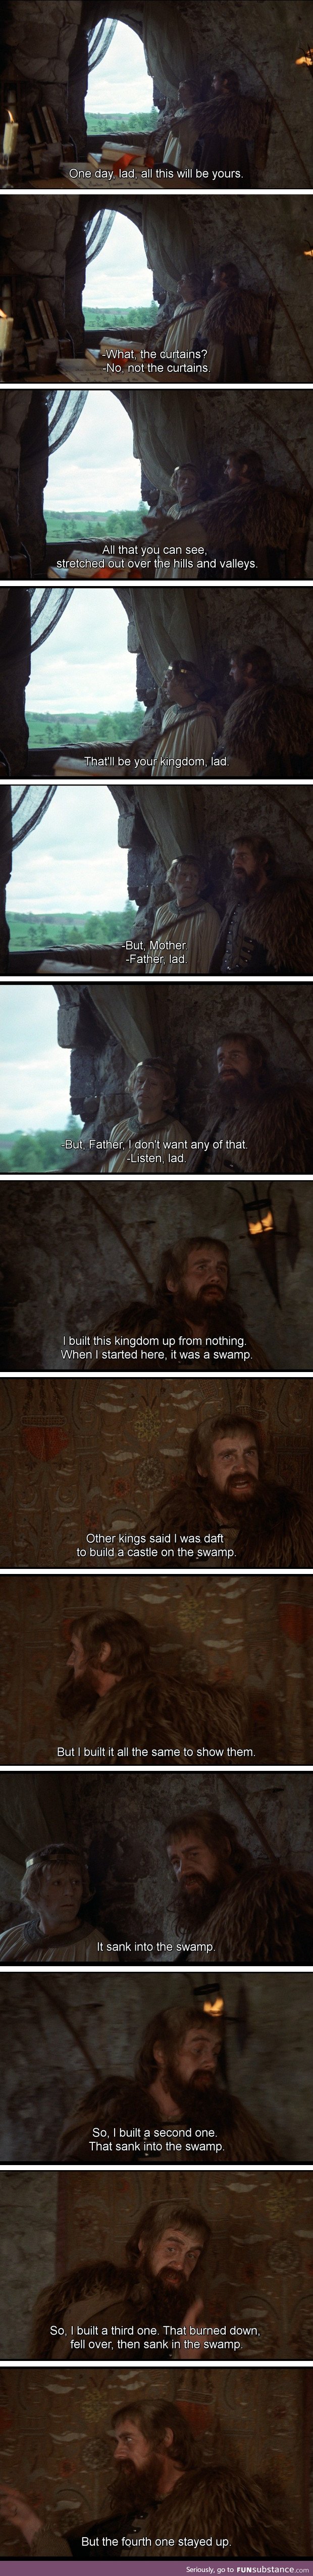 Monty Python and the Holy Grail 1974